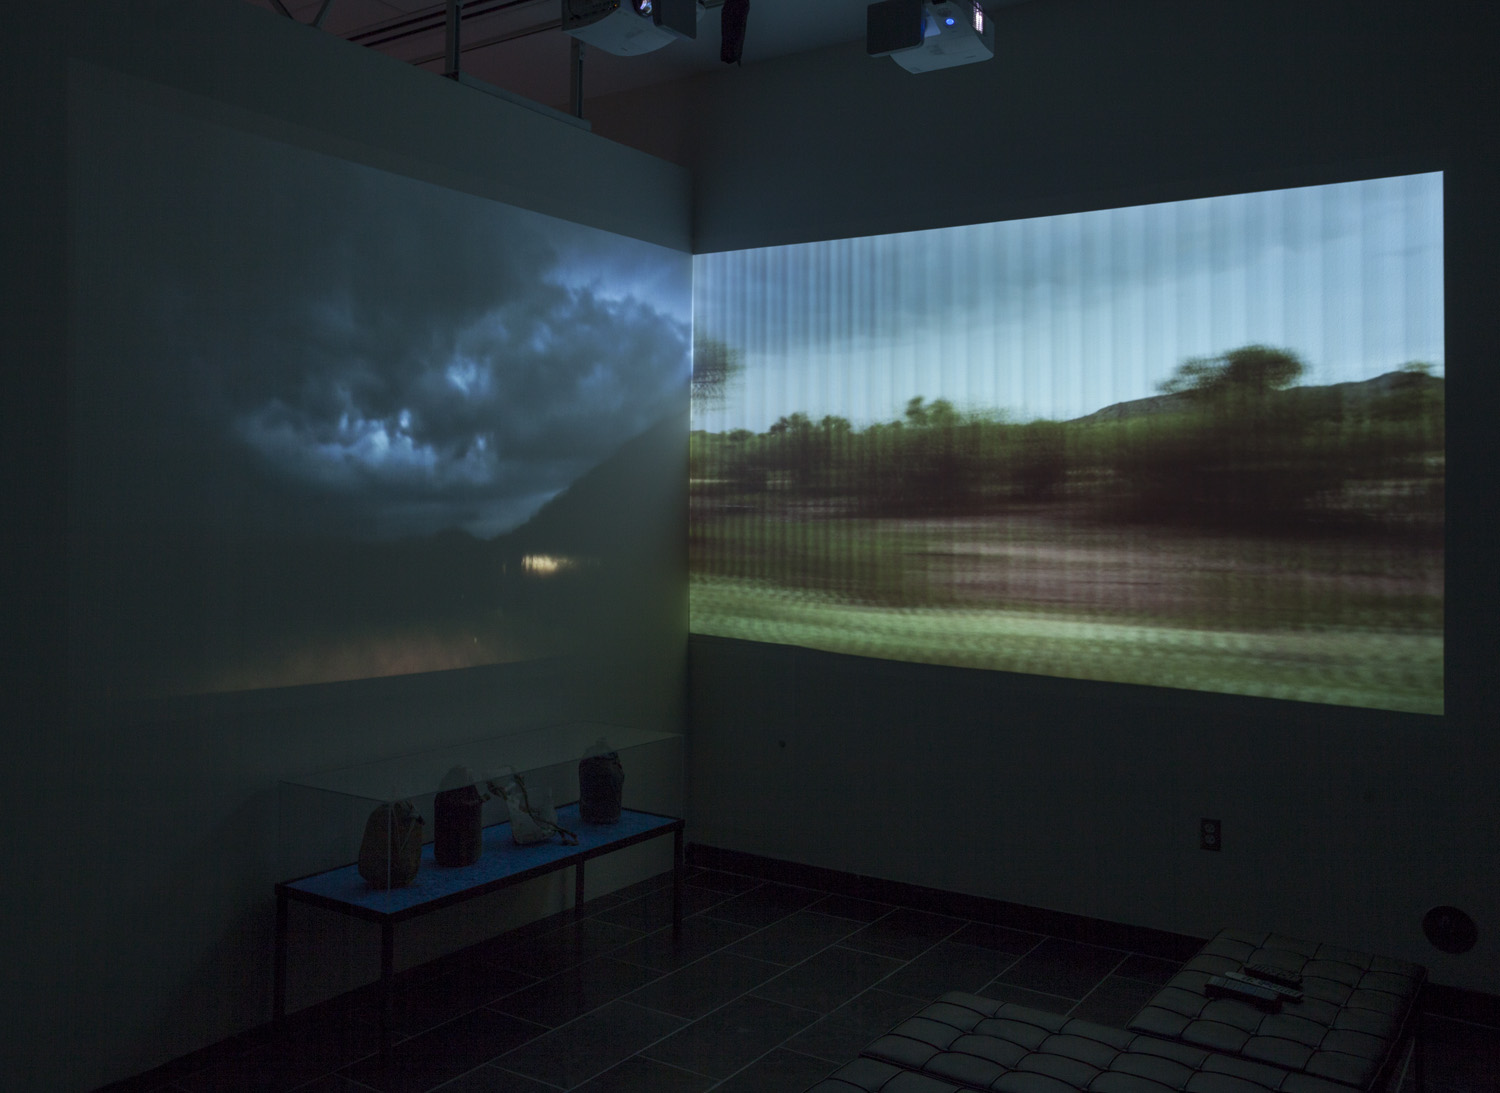  State of Exception video installation view, University of Michigan, 2012  